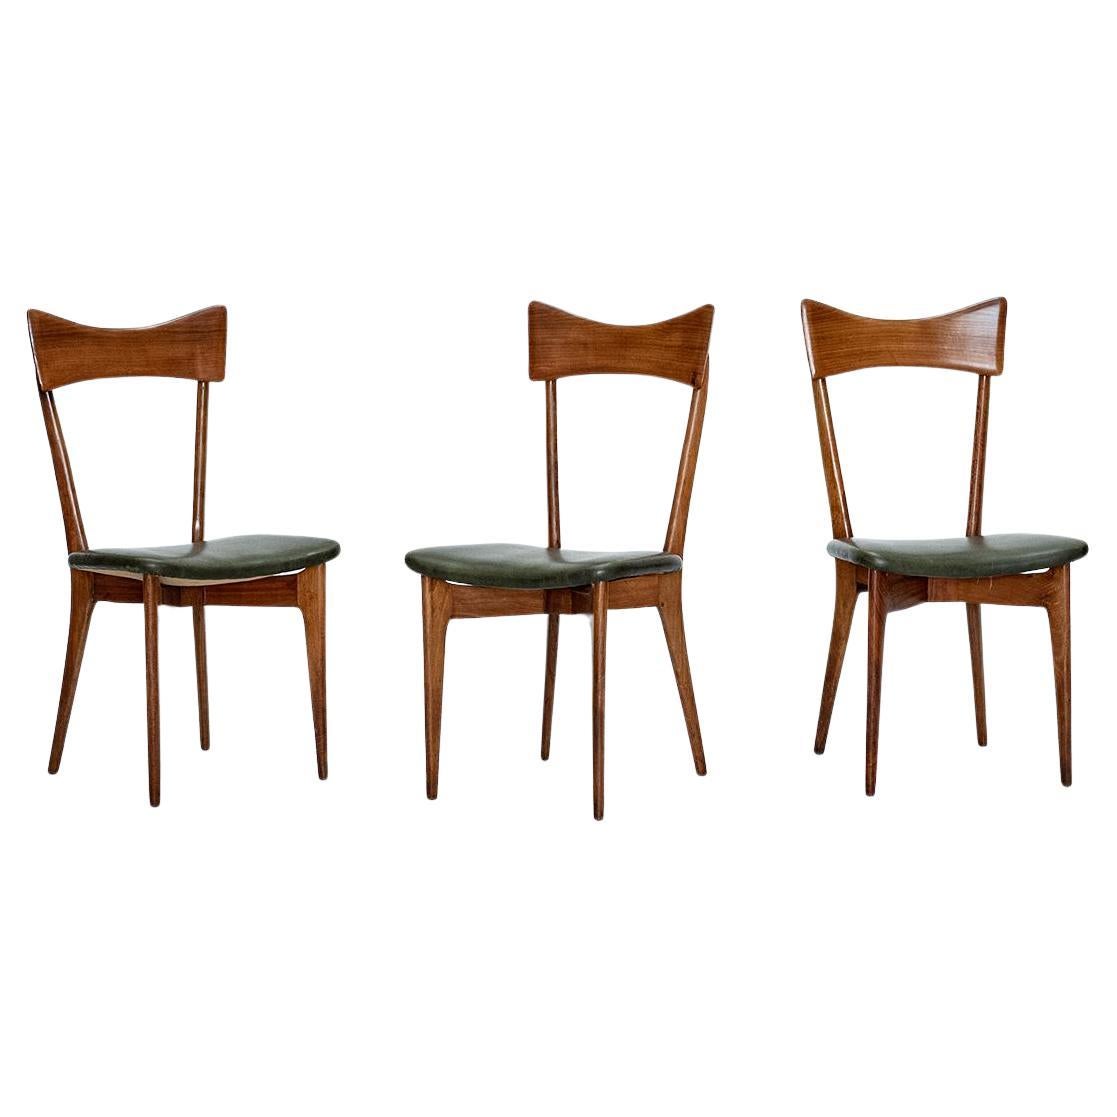 Italian Dining Chairs by Ico Parisi and Luisa Parisi for Ariberto Colombo, 1950s